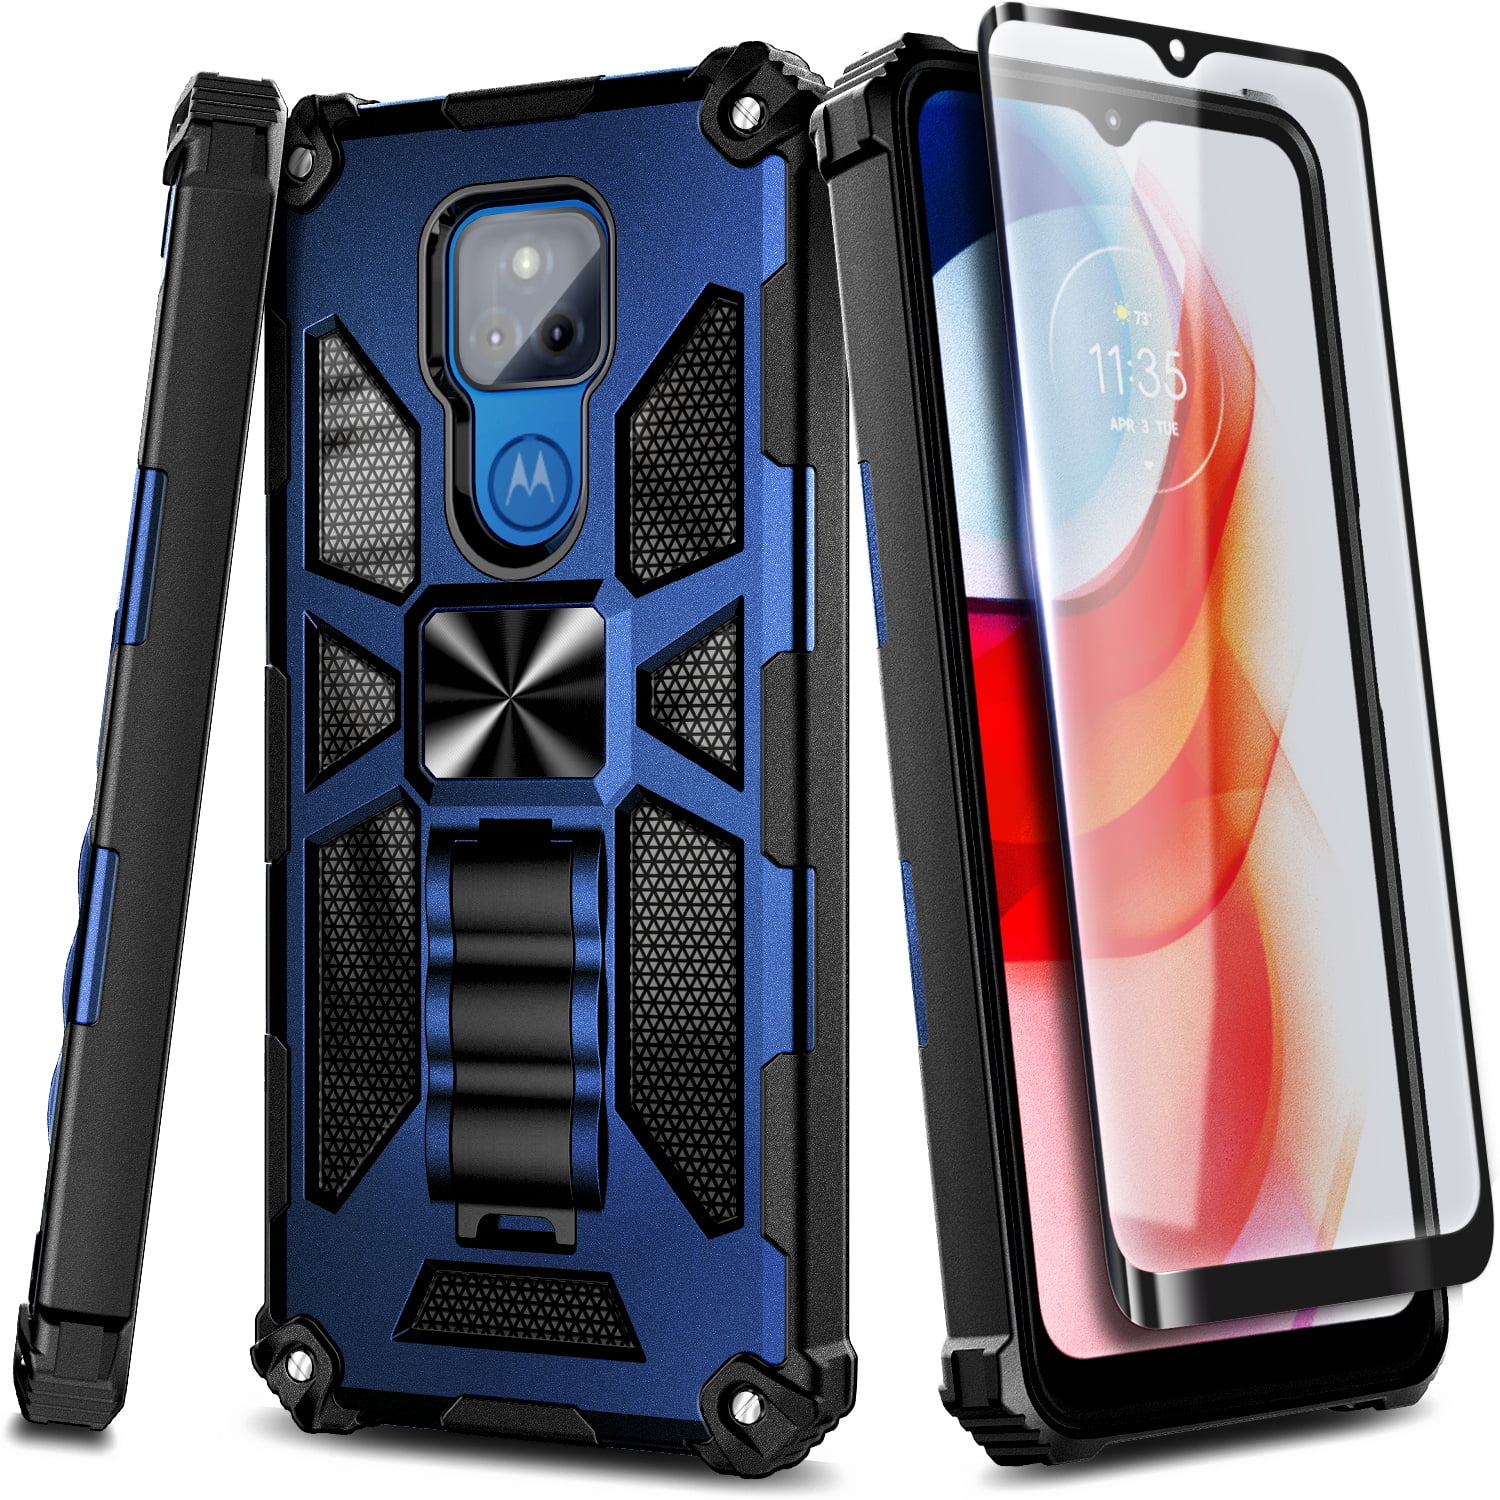 Motorola Moto G Play 2021 Case with Tempered Glass Screen